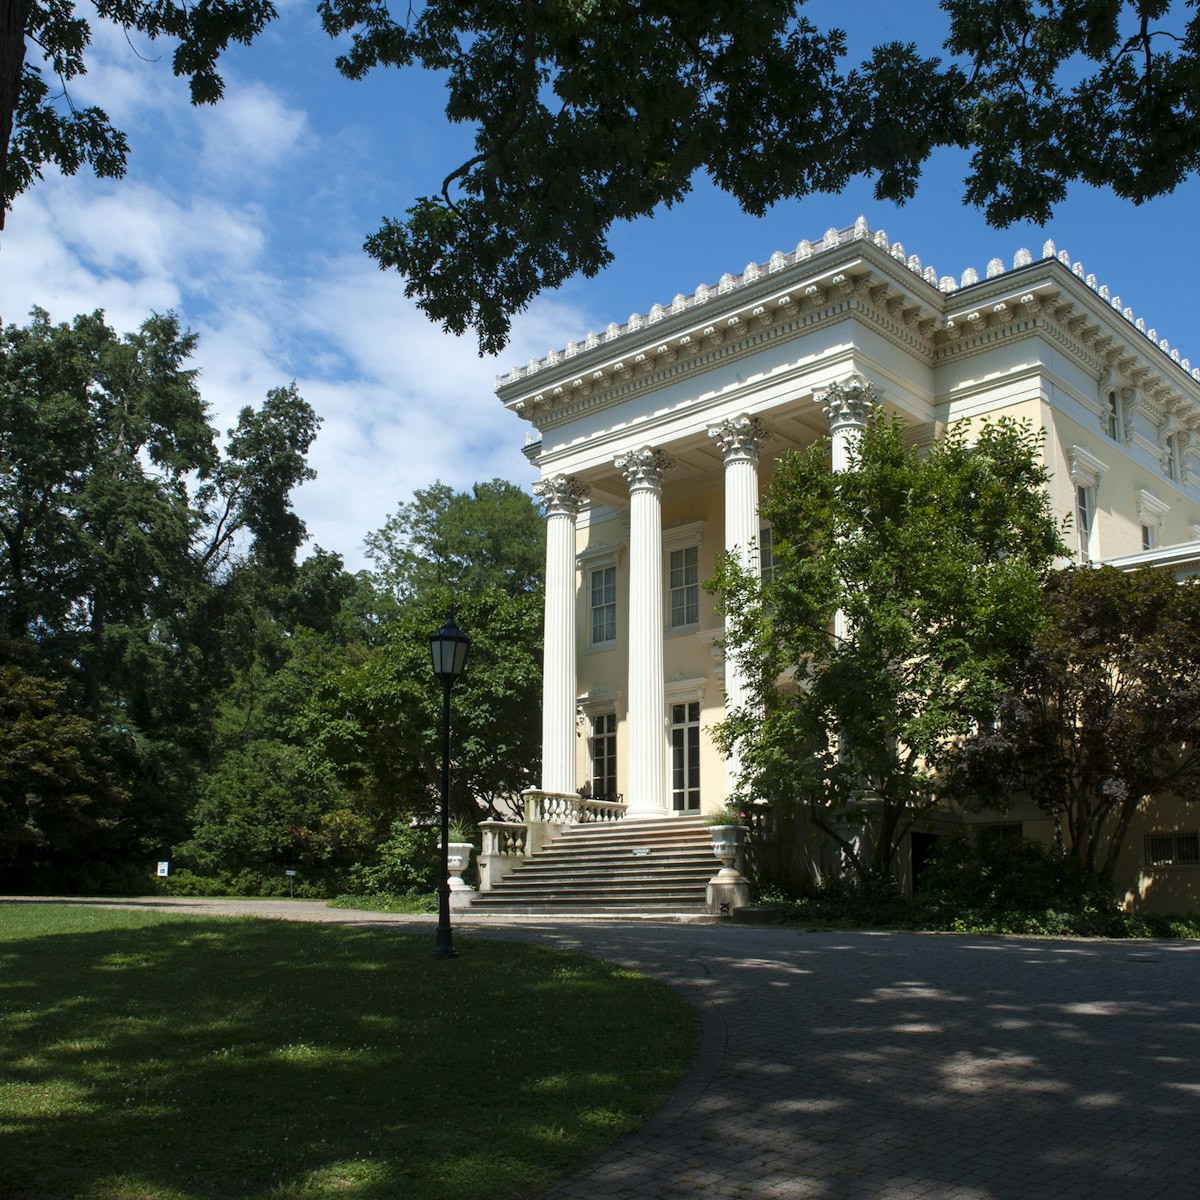 BALTIMORE, MD - JULY 23:.The Evergreen Mansion formerly the home of the Garrett family is now a museum and library run by Johns Hopkins University Tuesday July 23, 2013 in Baltimore, MD.  Russian artist Leon Bakst helped transform some of the rooms in 1922..(Photo by Katherine Frey/The Washington Post via Getty Images)